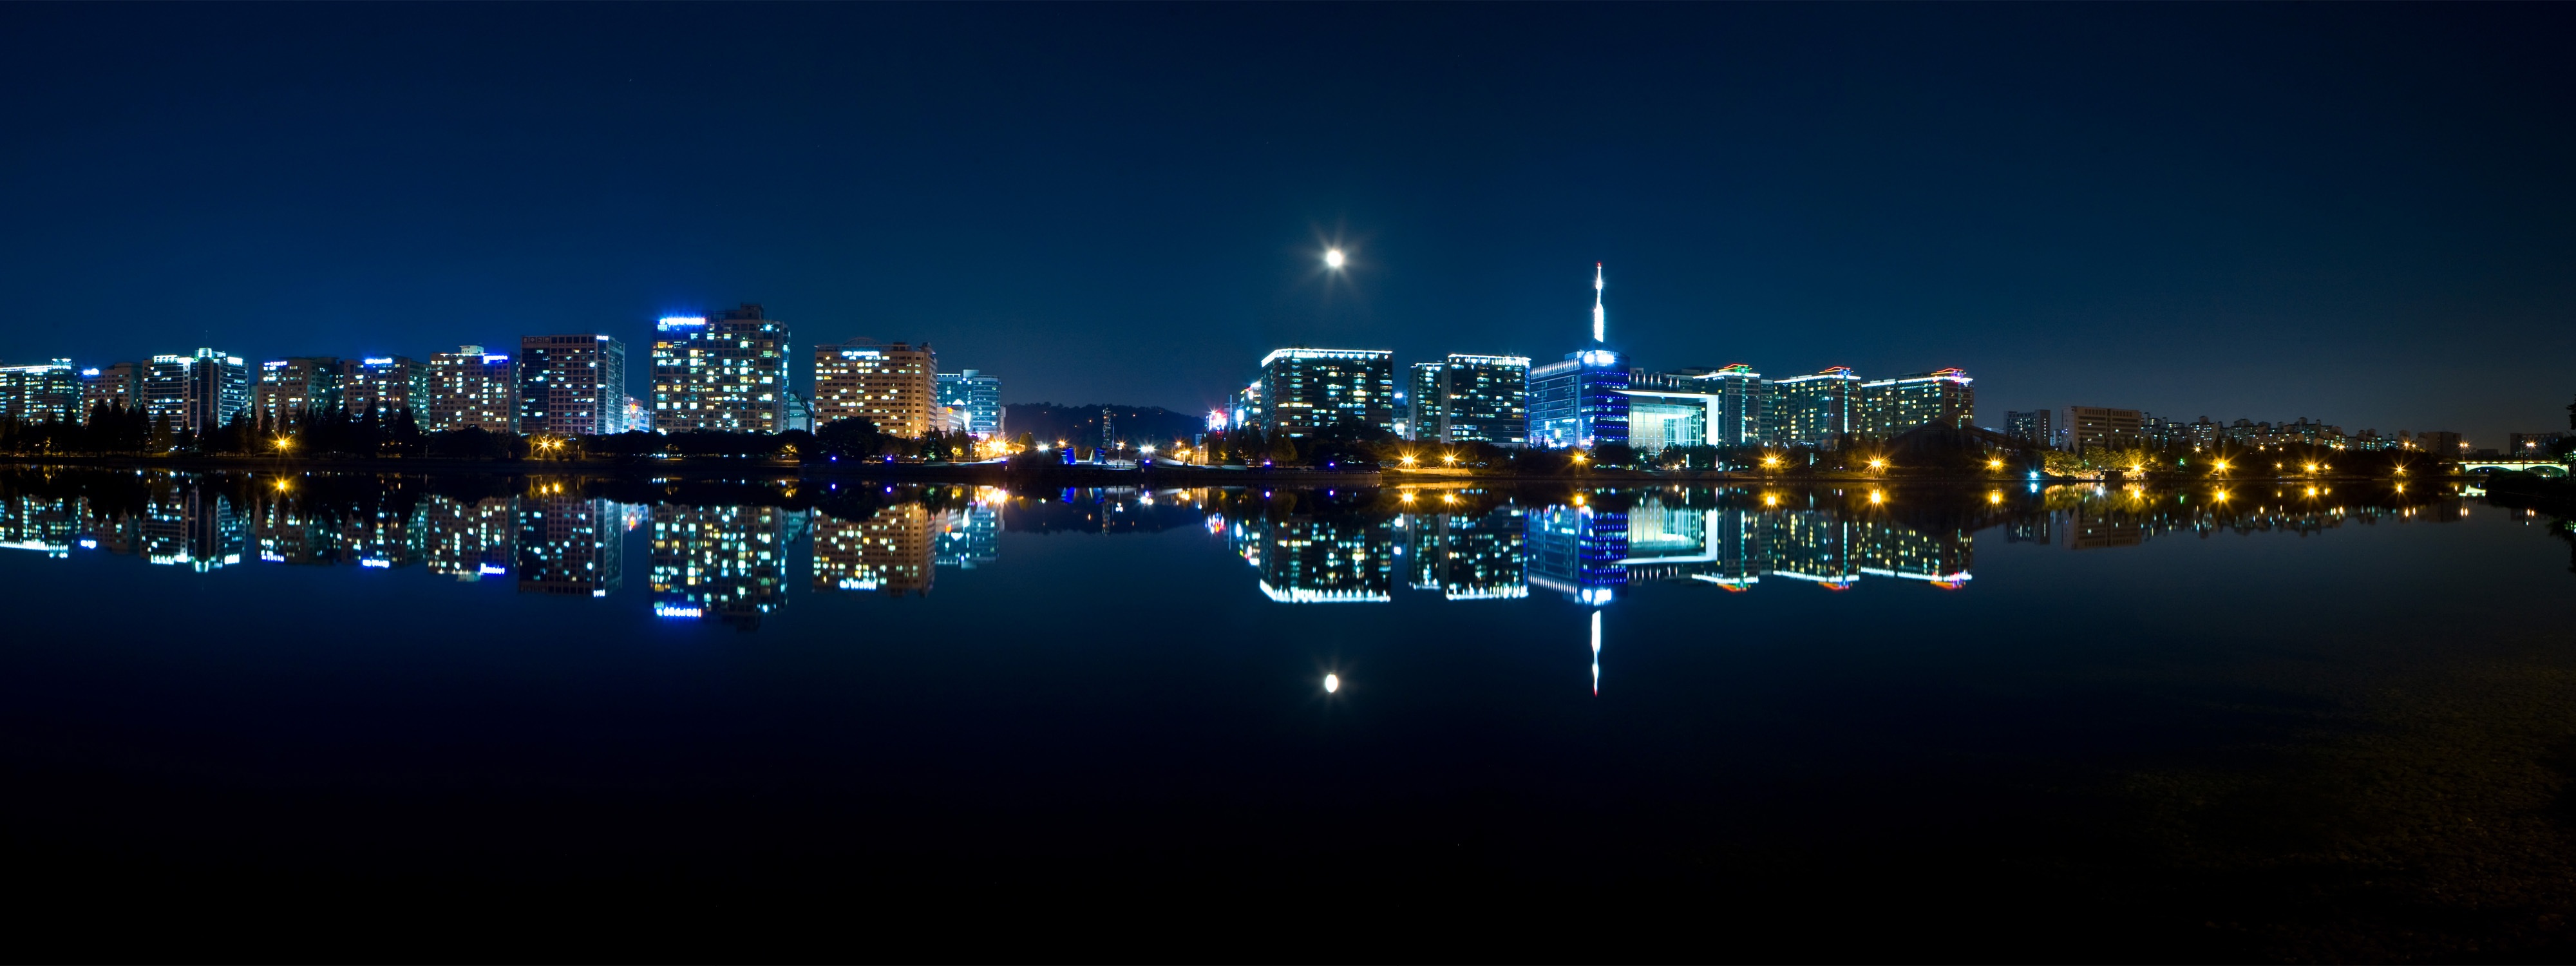 The night city by the sea is reflected in the water